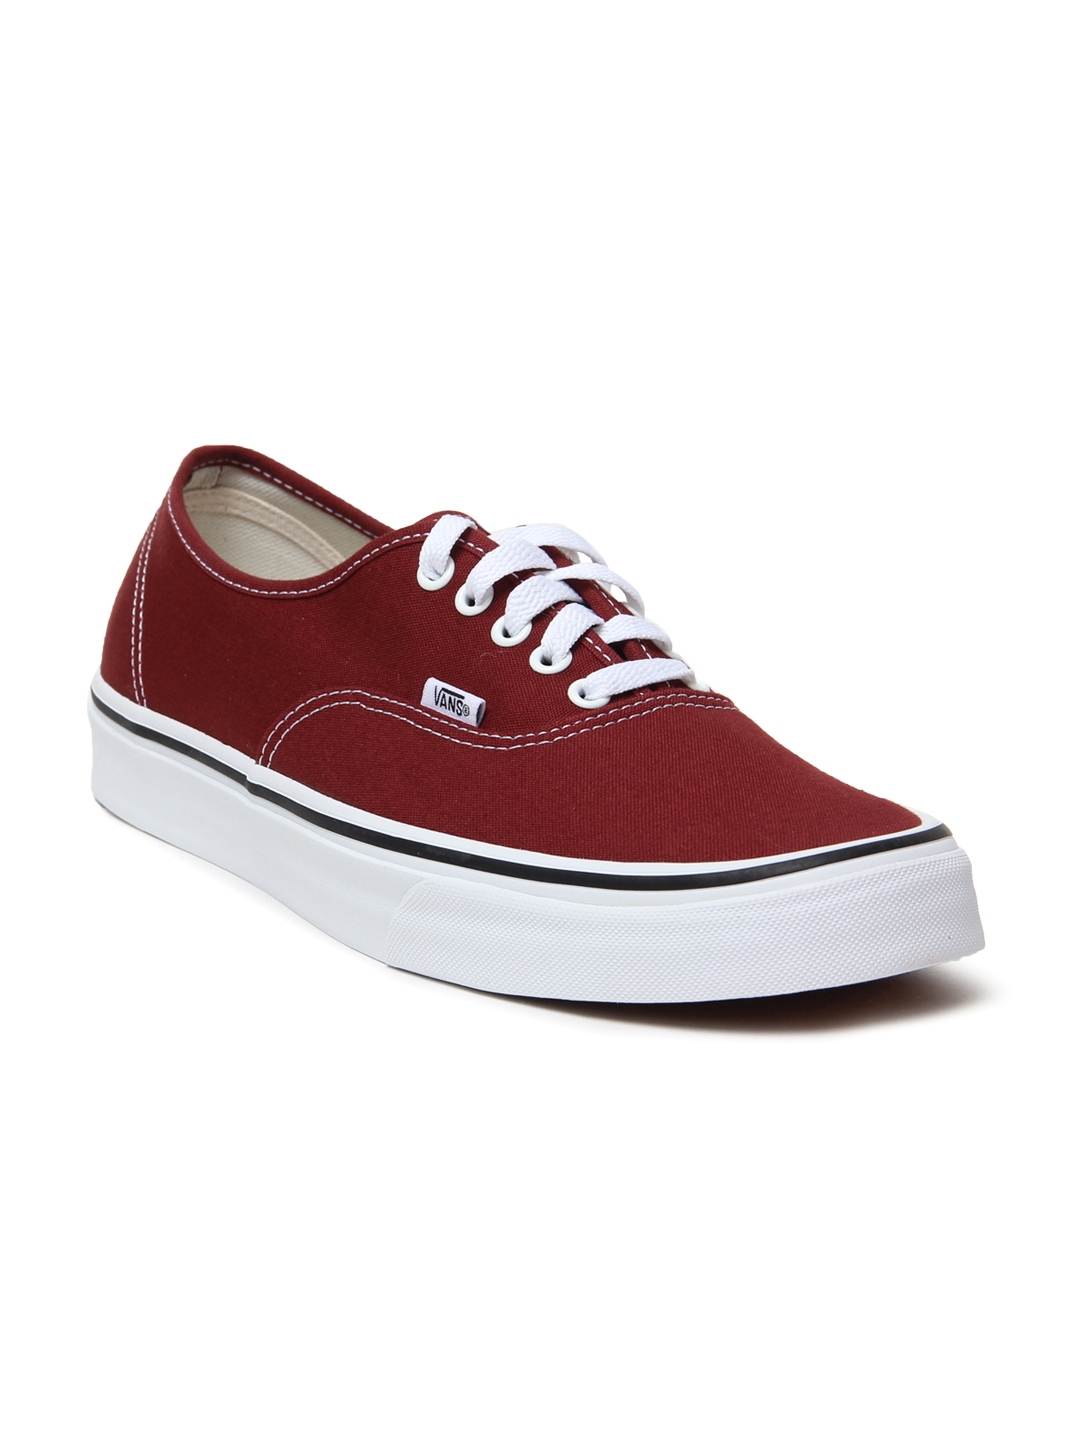 Buy Vans Unisex Maroon Authentic Sneakers - Casual Shoes for Unisex